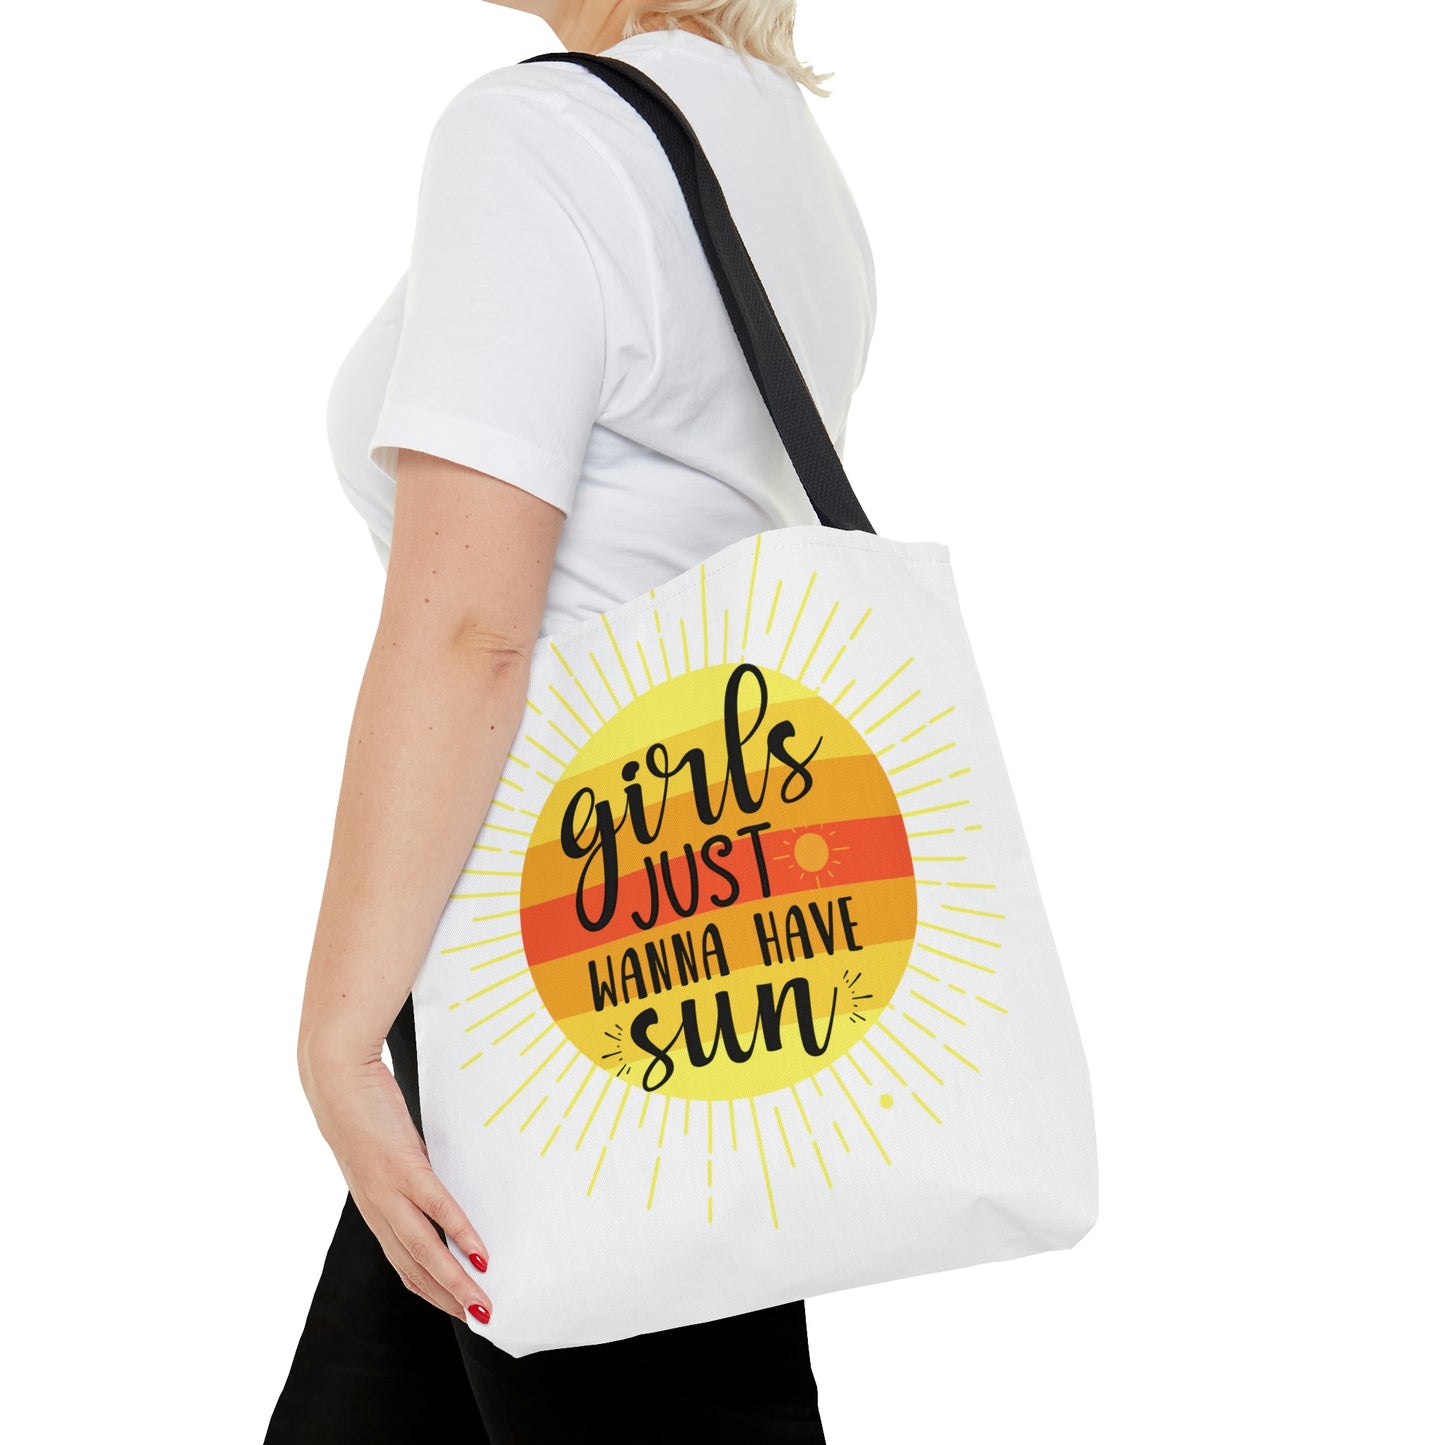 High Quality, All-Over Print Tote Bag, Girls Just Wanna Have Sun, Sunshine Suns Tote Bag